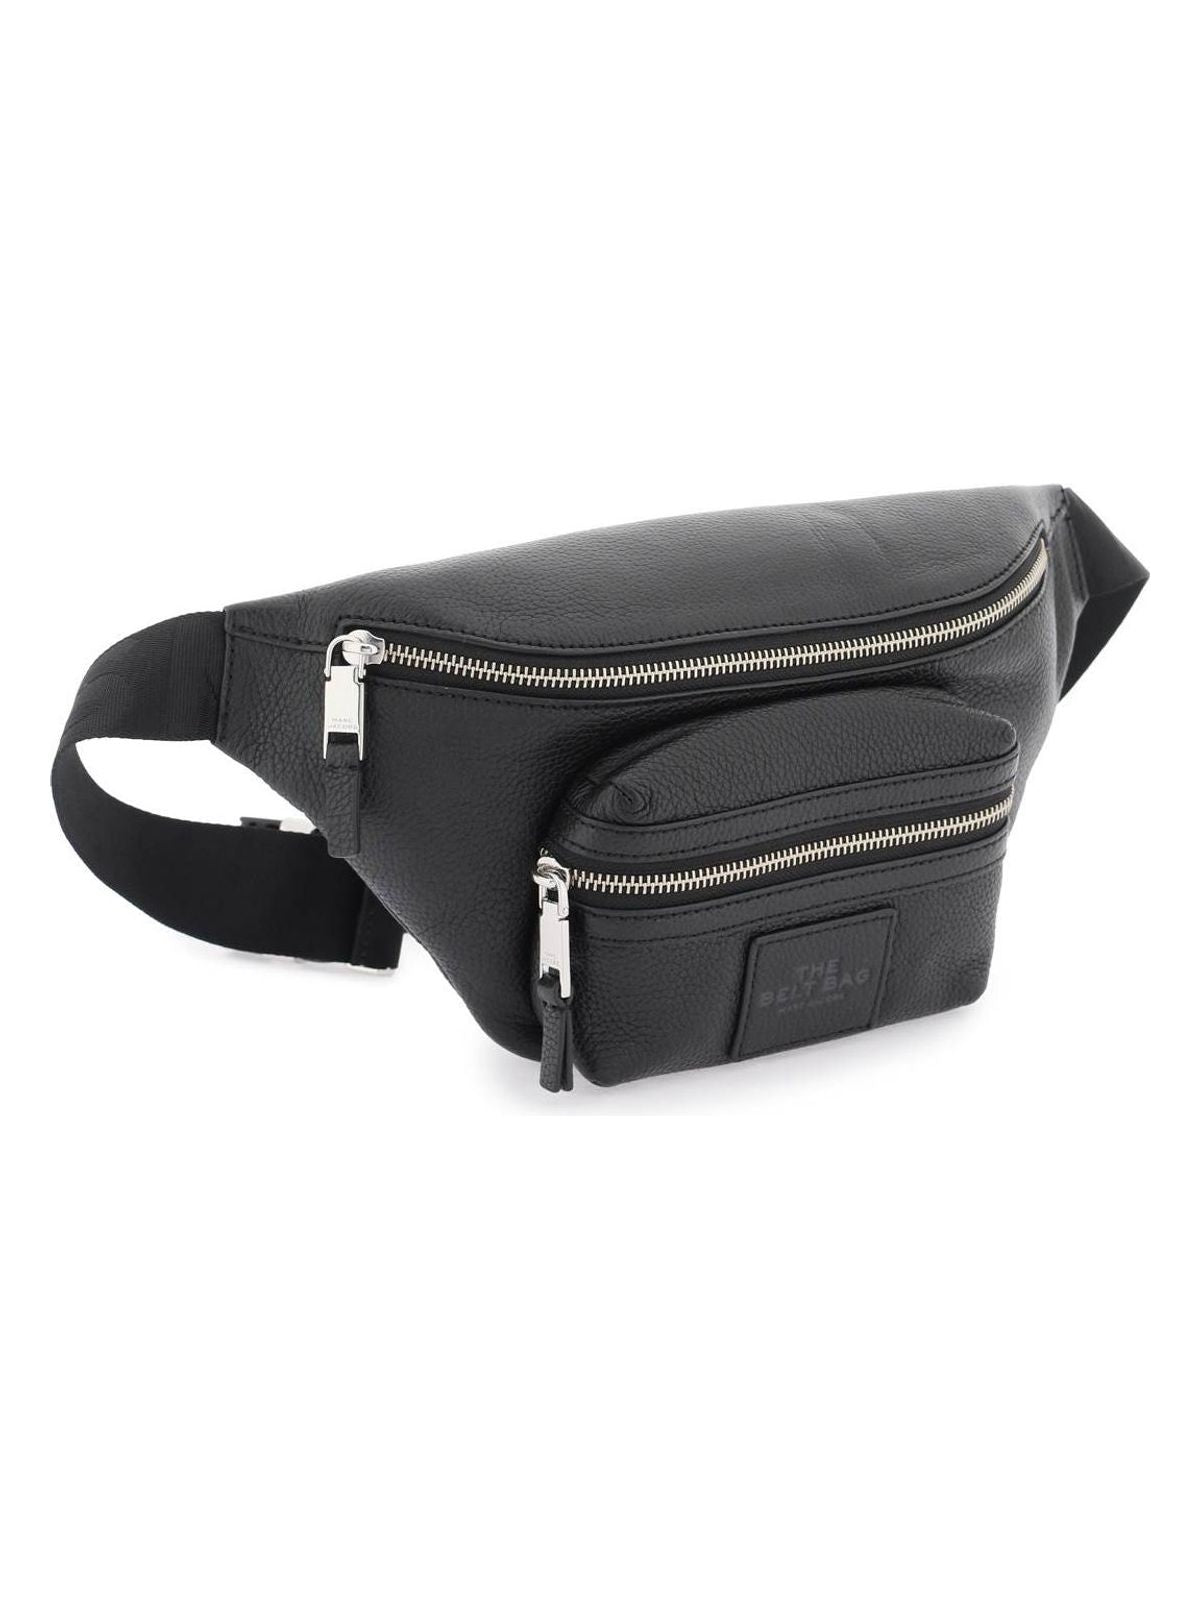 001B MARC JACOBS  LEATHER BELT BAG: THE PERFECT